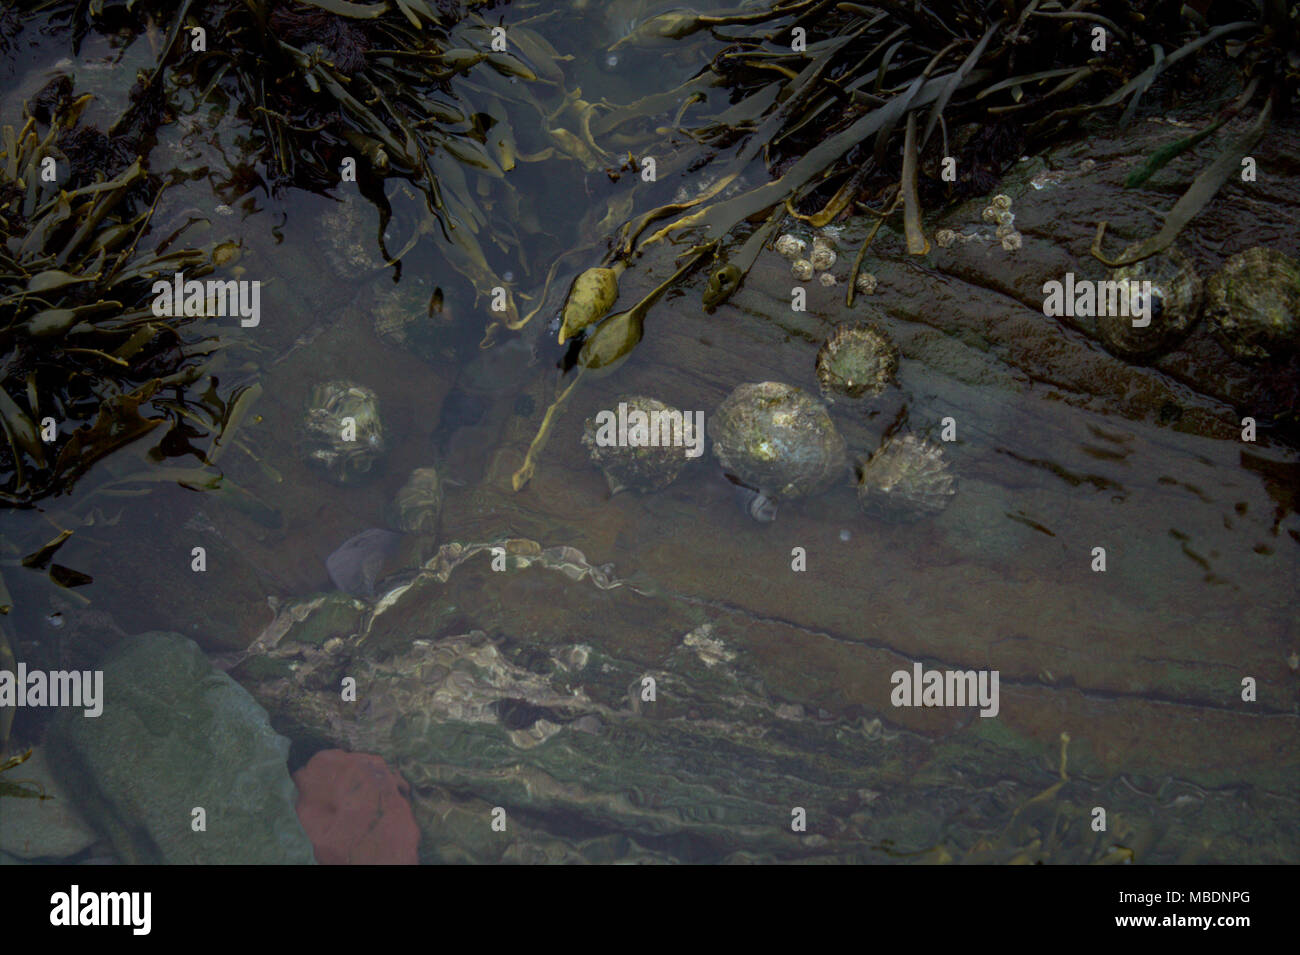 clear waters of a rock pool at low tide with seaweed and limpets on the rocks. Stock Photo